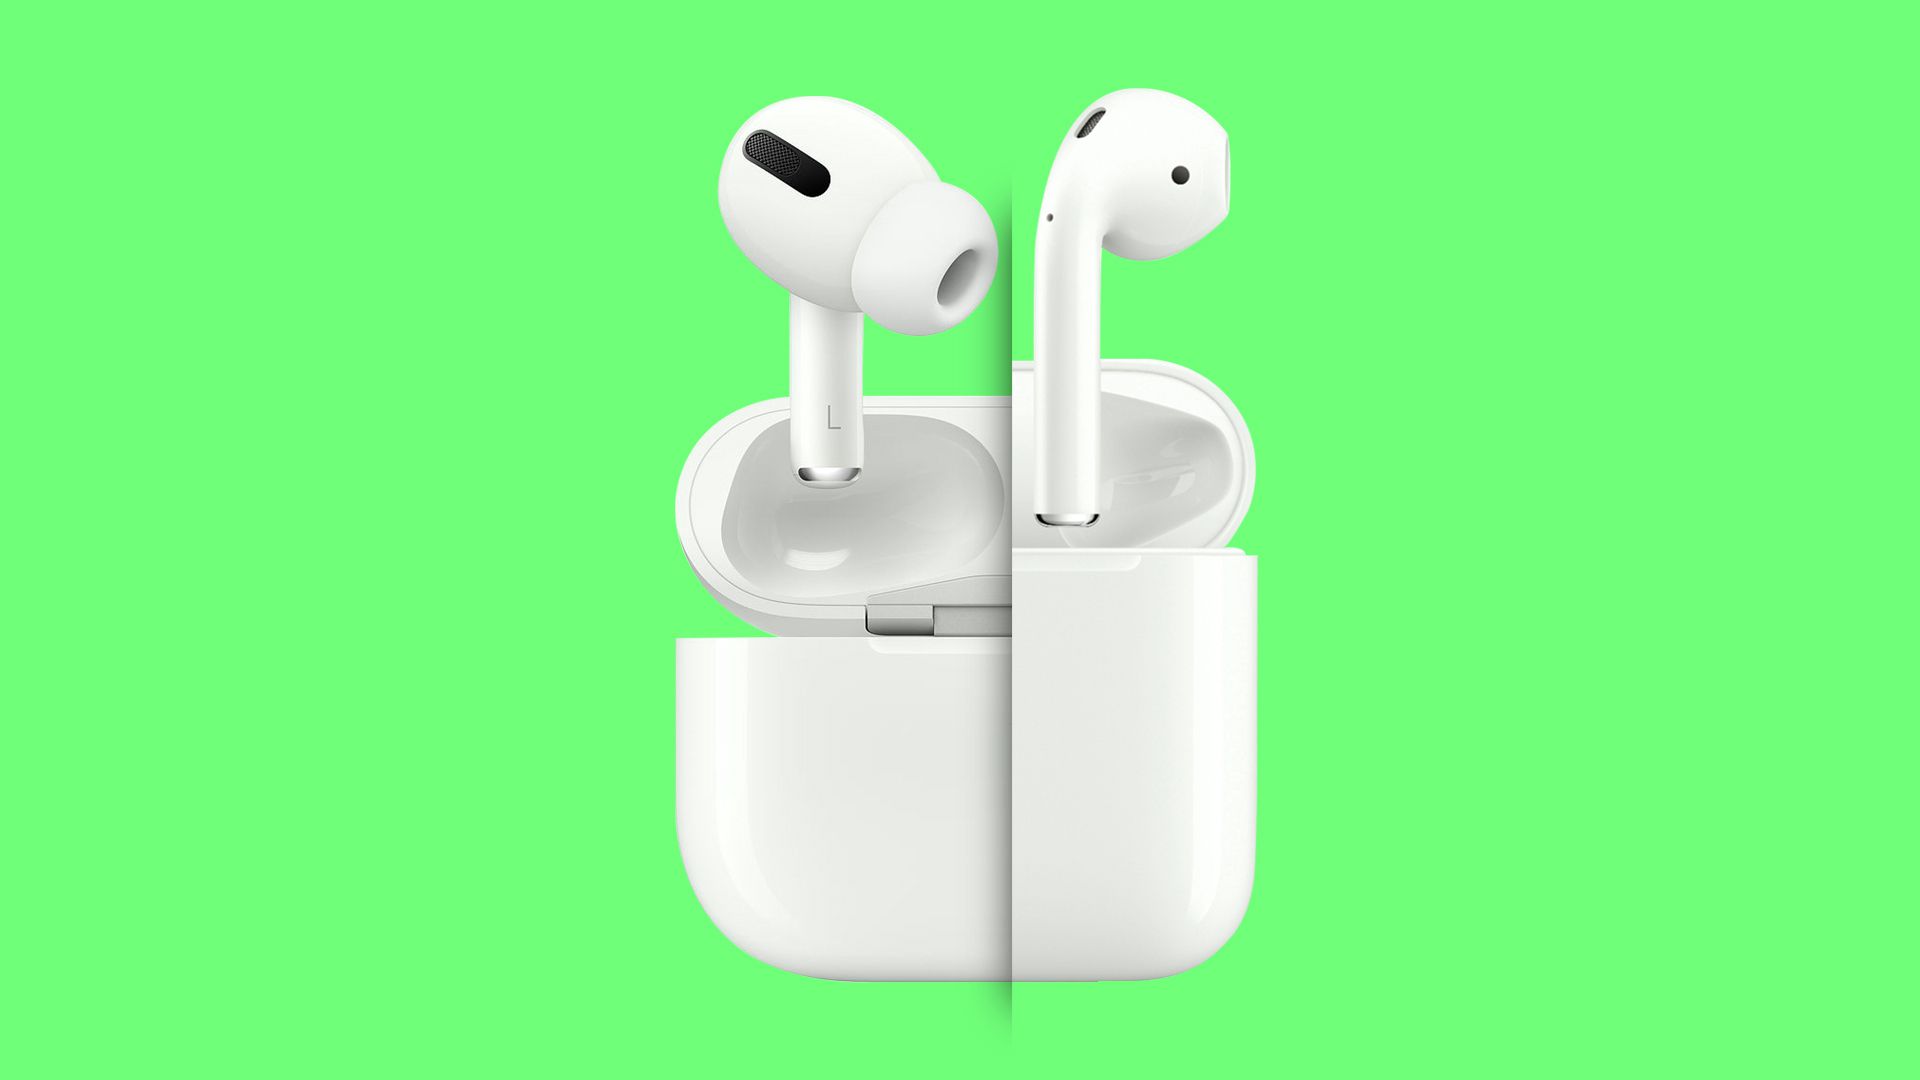 Airpods 2 huilian. AIRPODS Pro 2021. Apple AIRPODS Pro 2 новая модель. AIRPODS Pro 5. AIRPODS Pro 3.